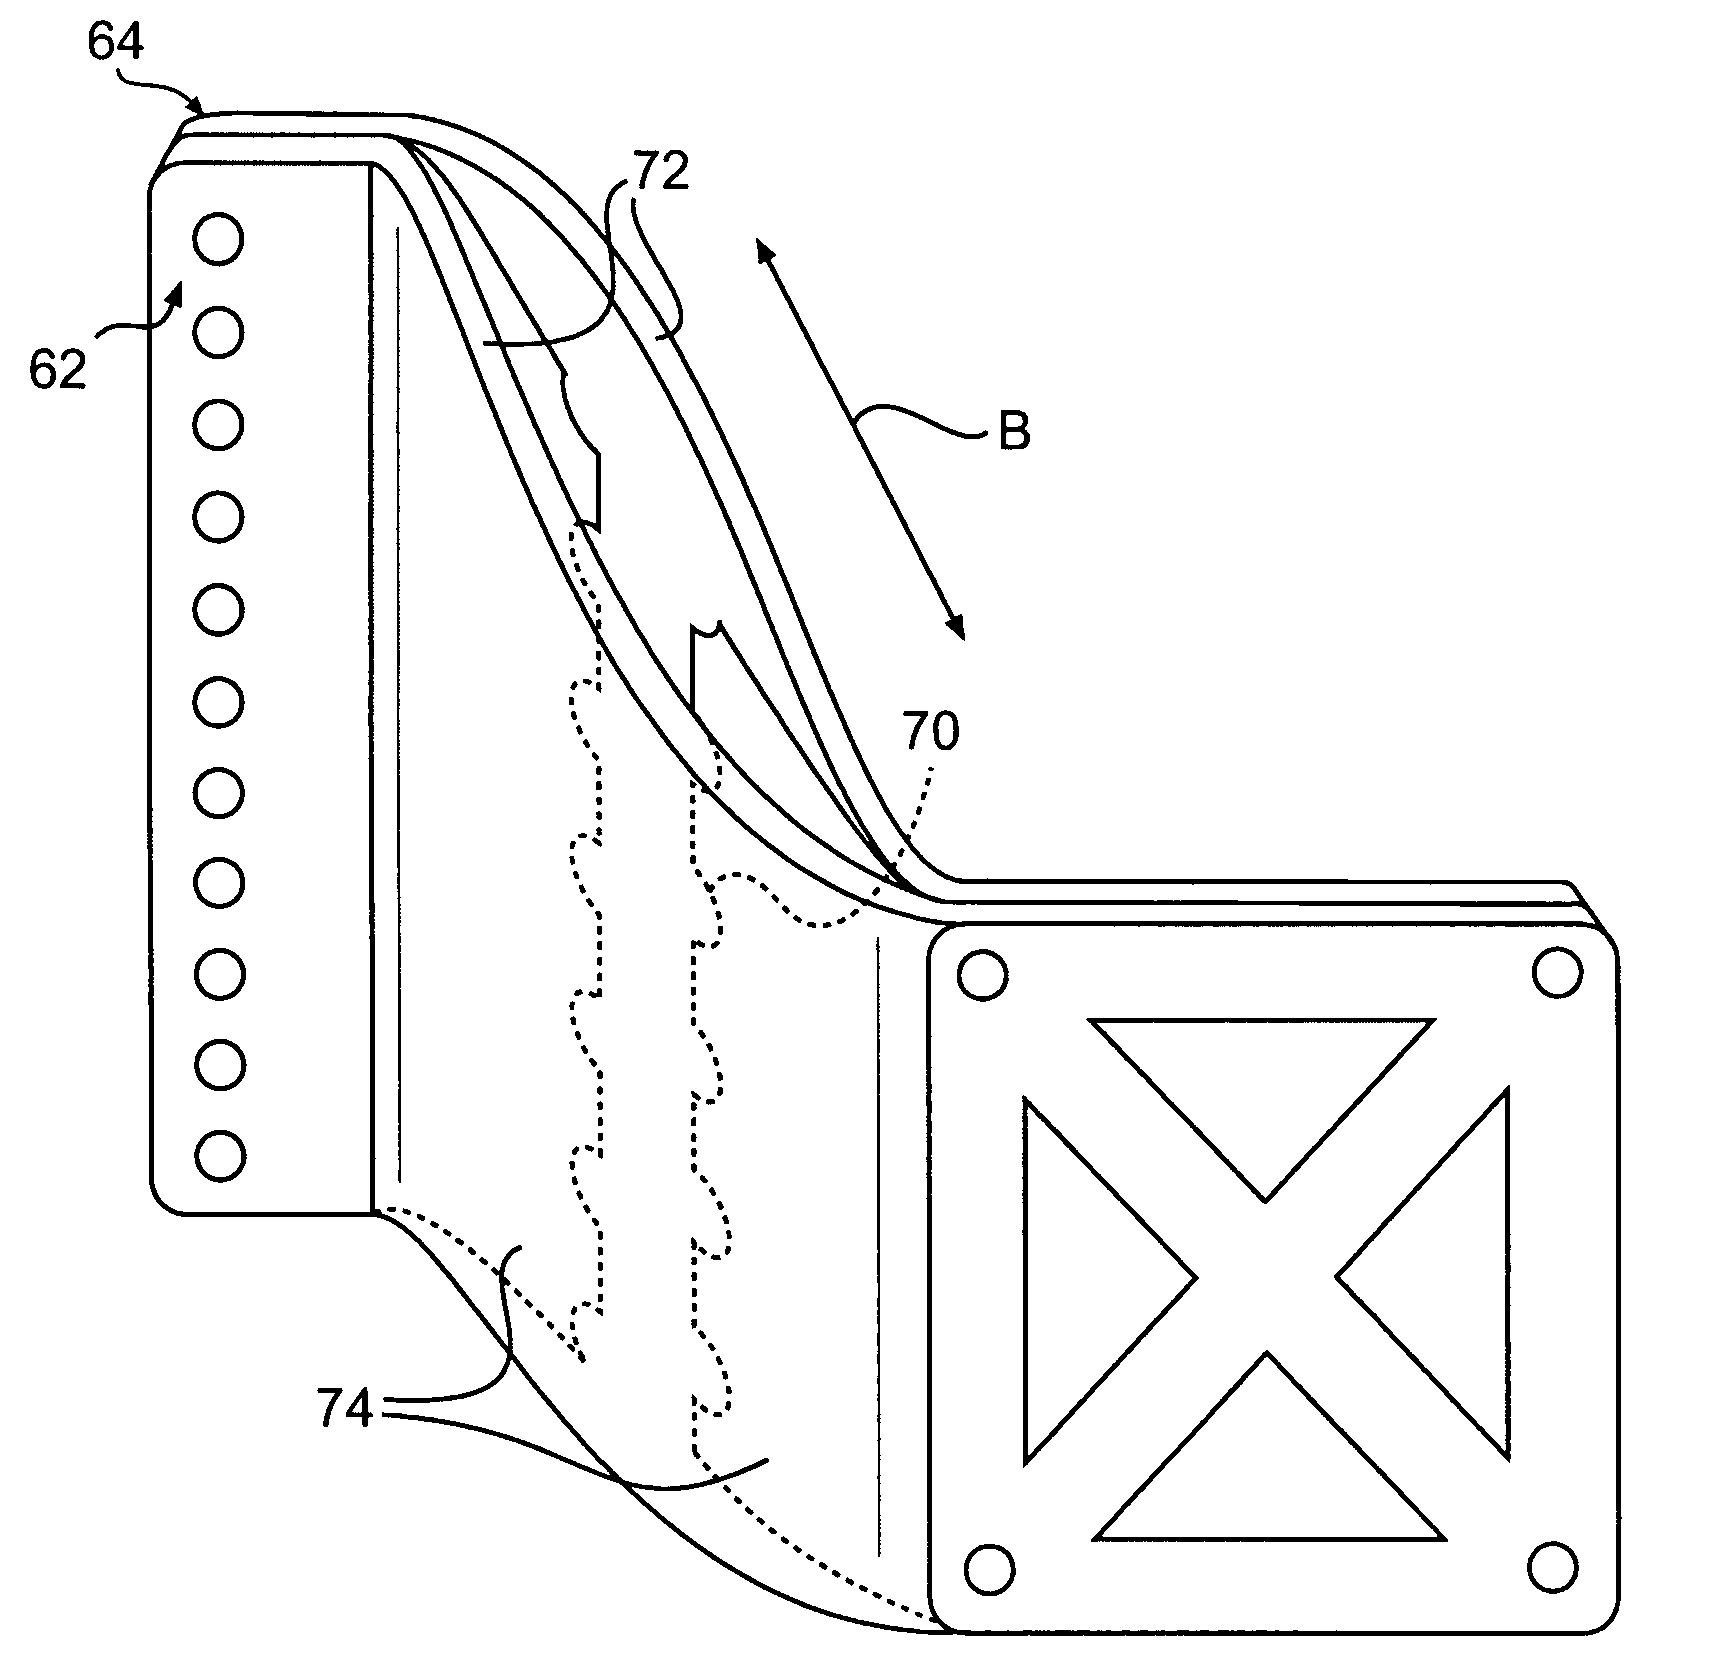 Gas turbine engine auxiliary component mount